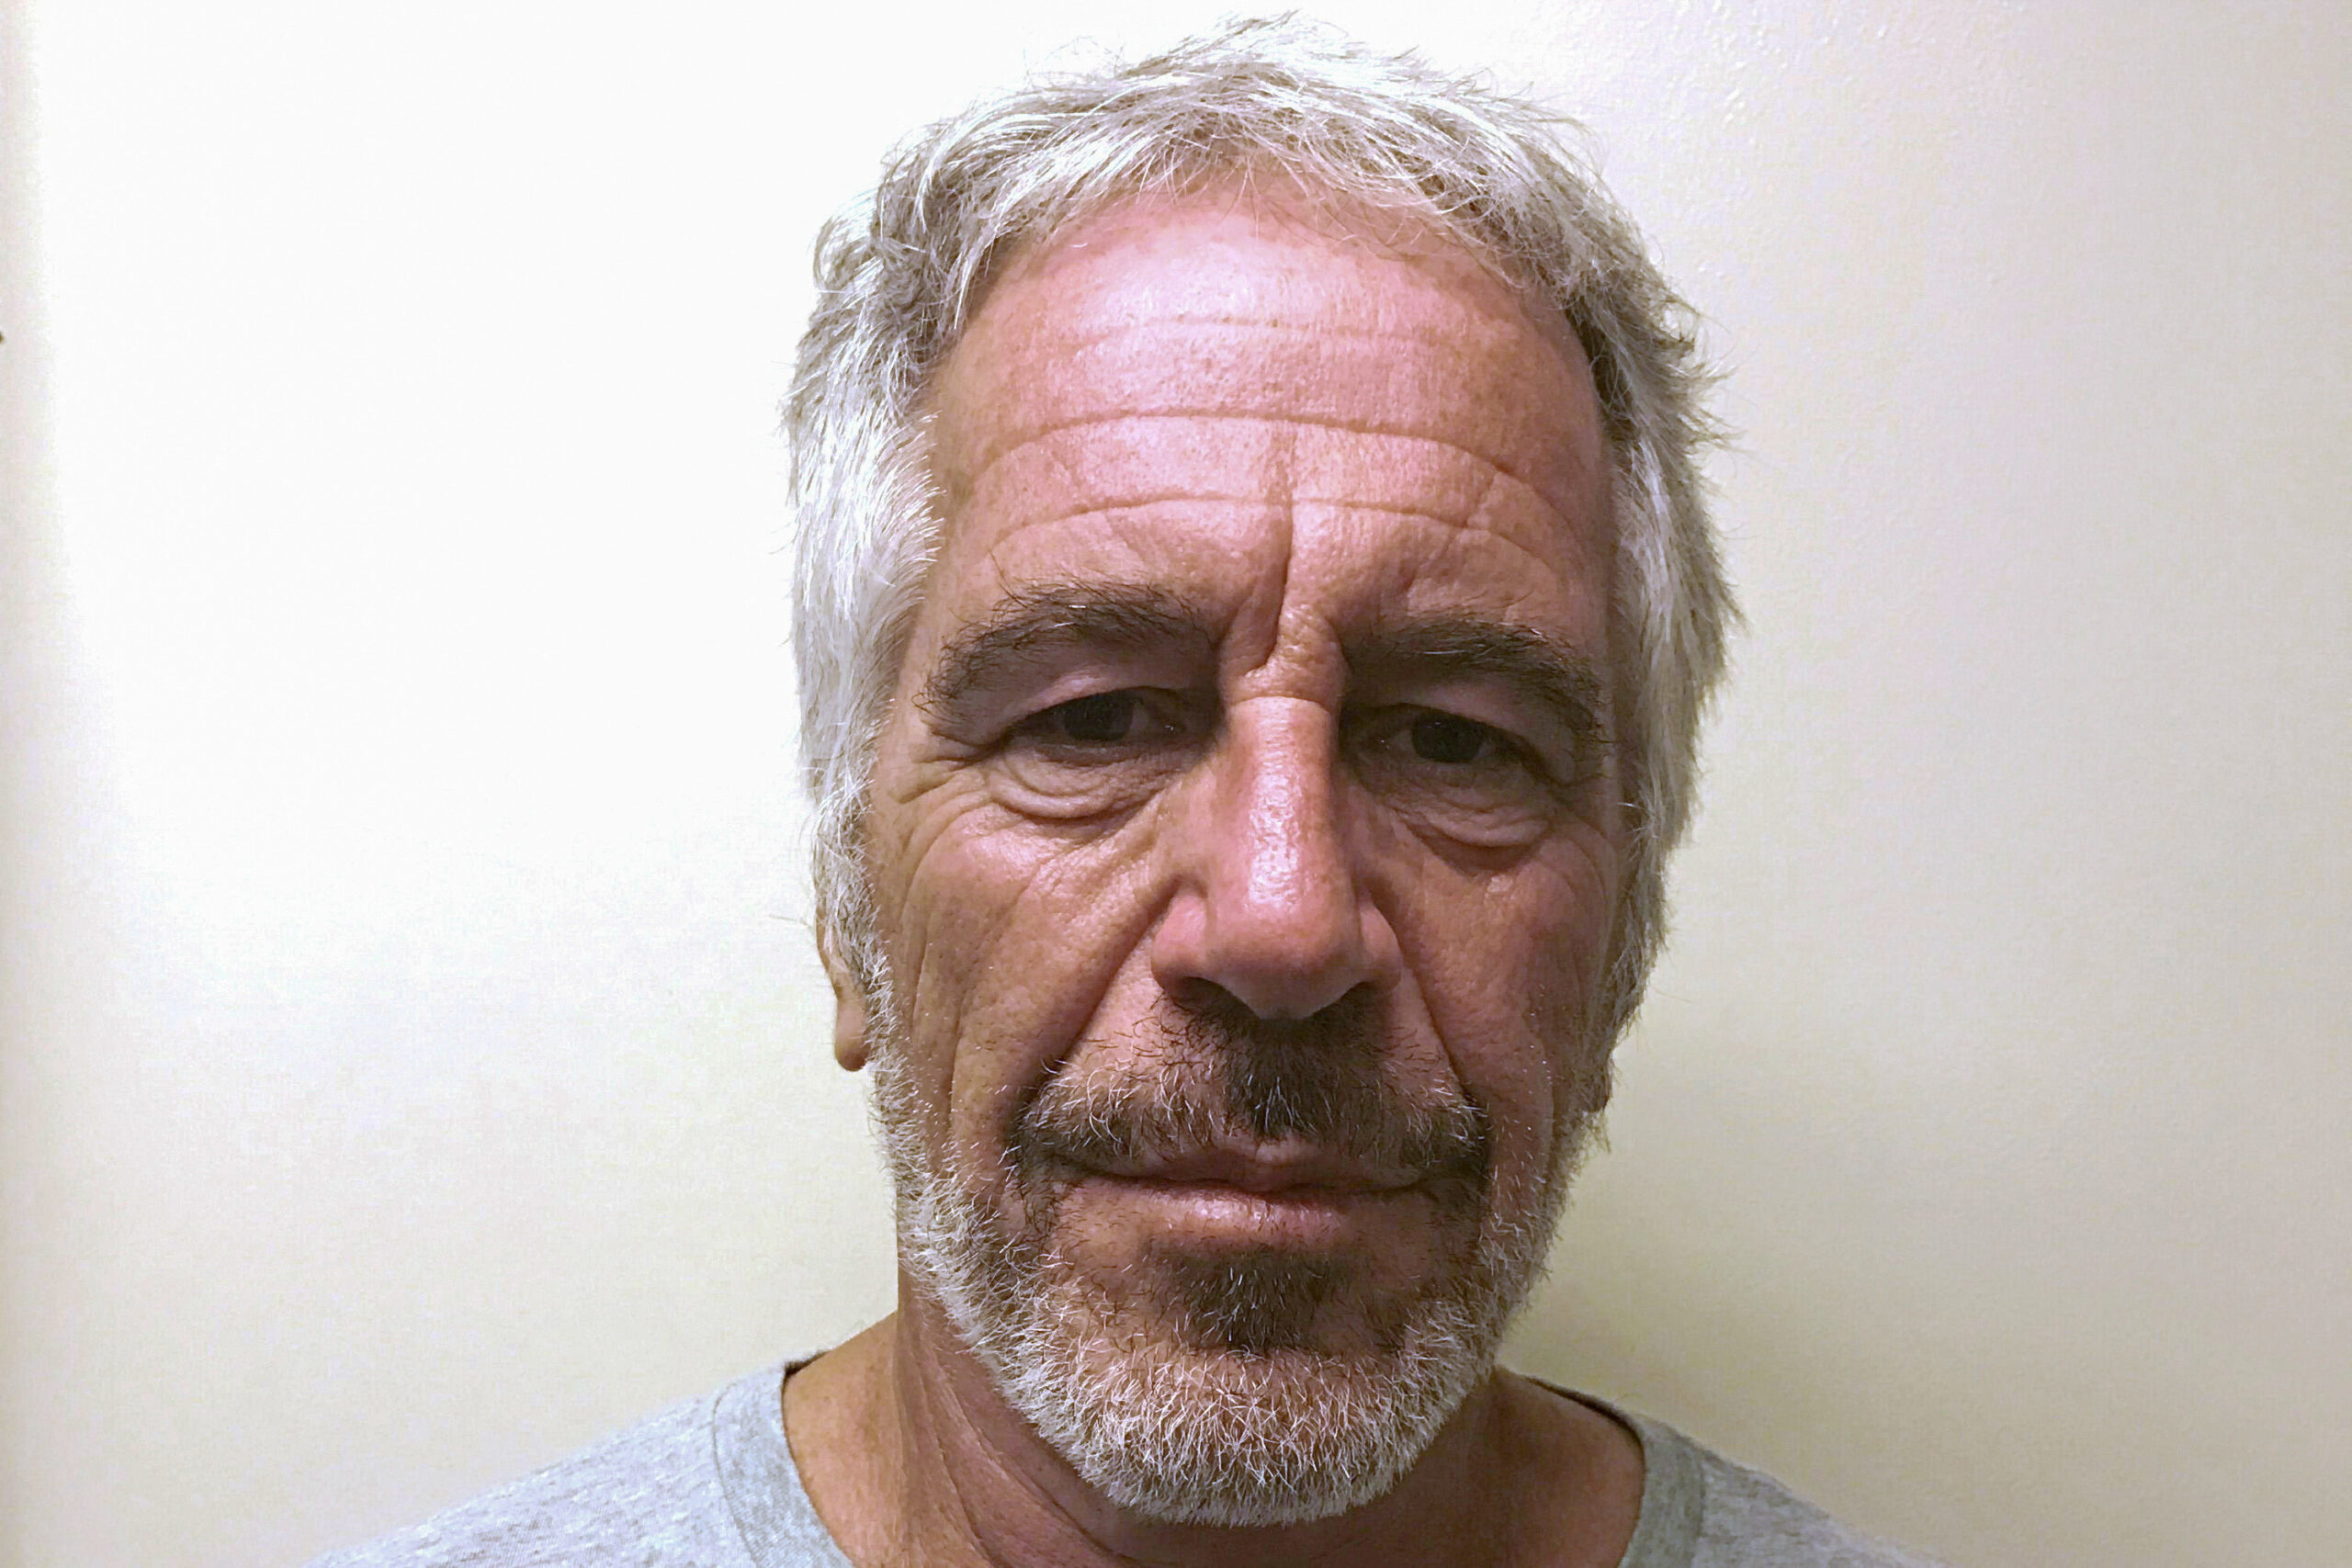 US prosecutors knew of Jeffrey Epstein's crimes years earlier, new documents reveal